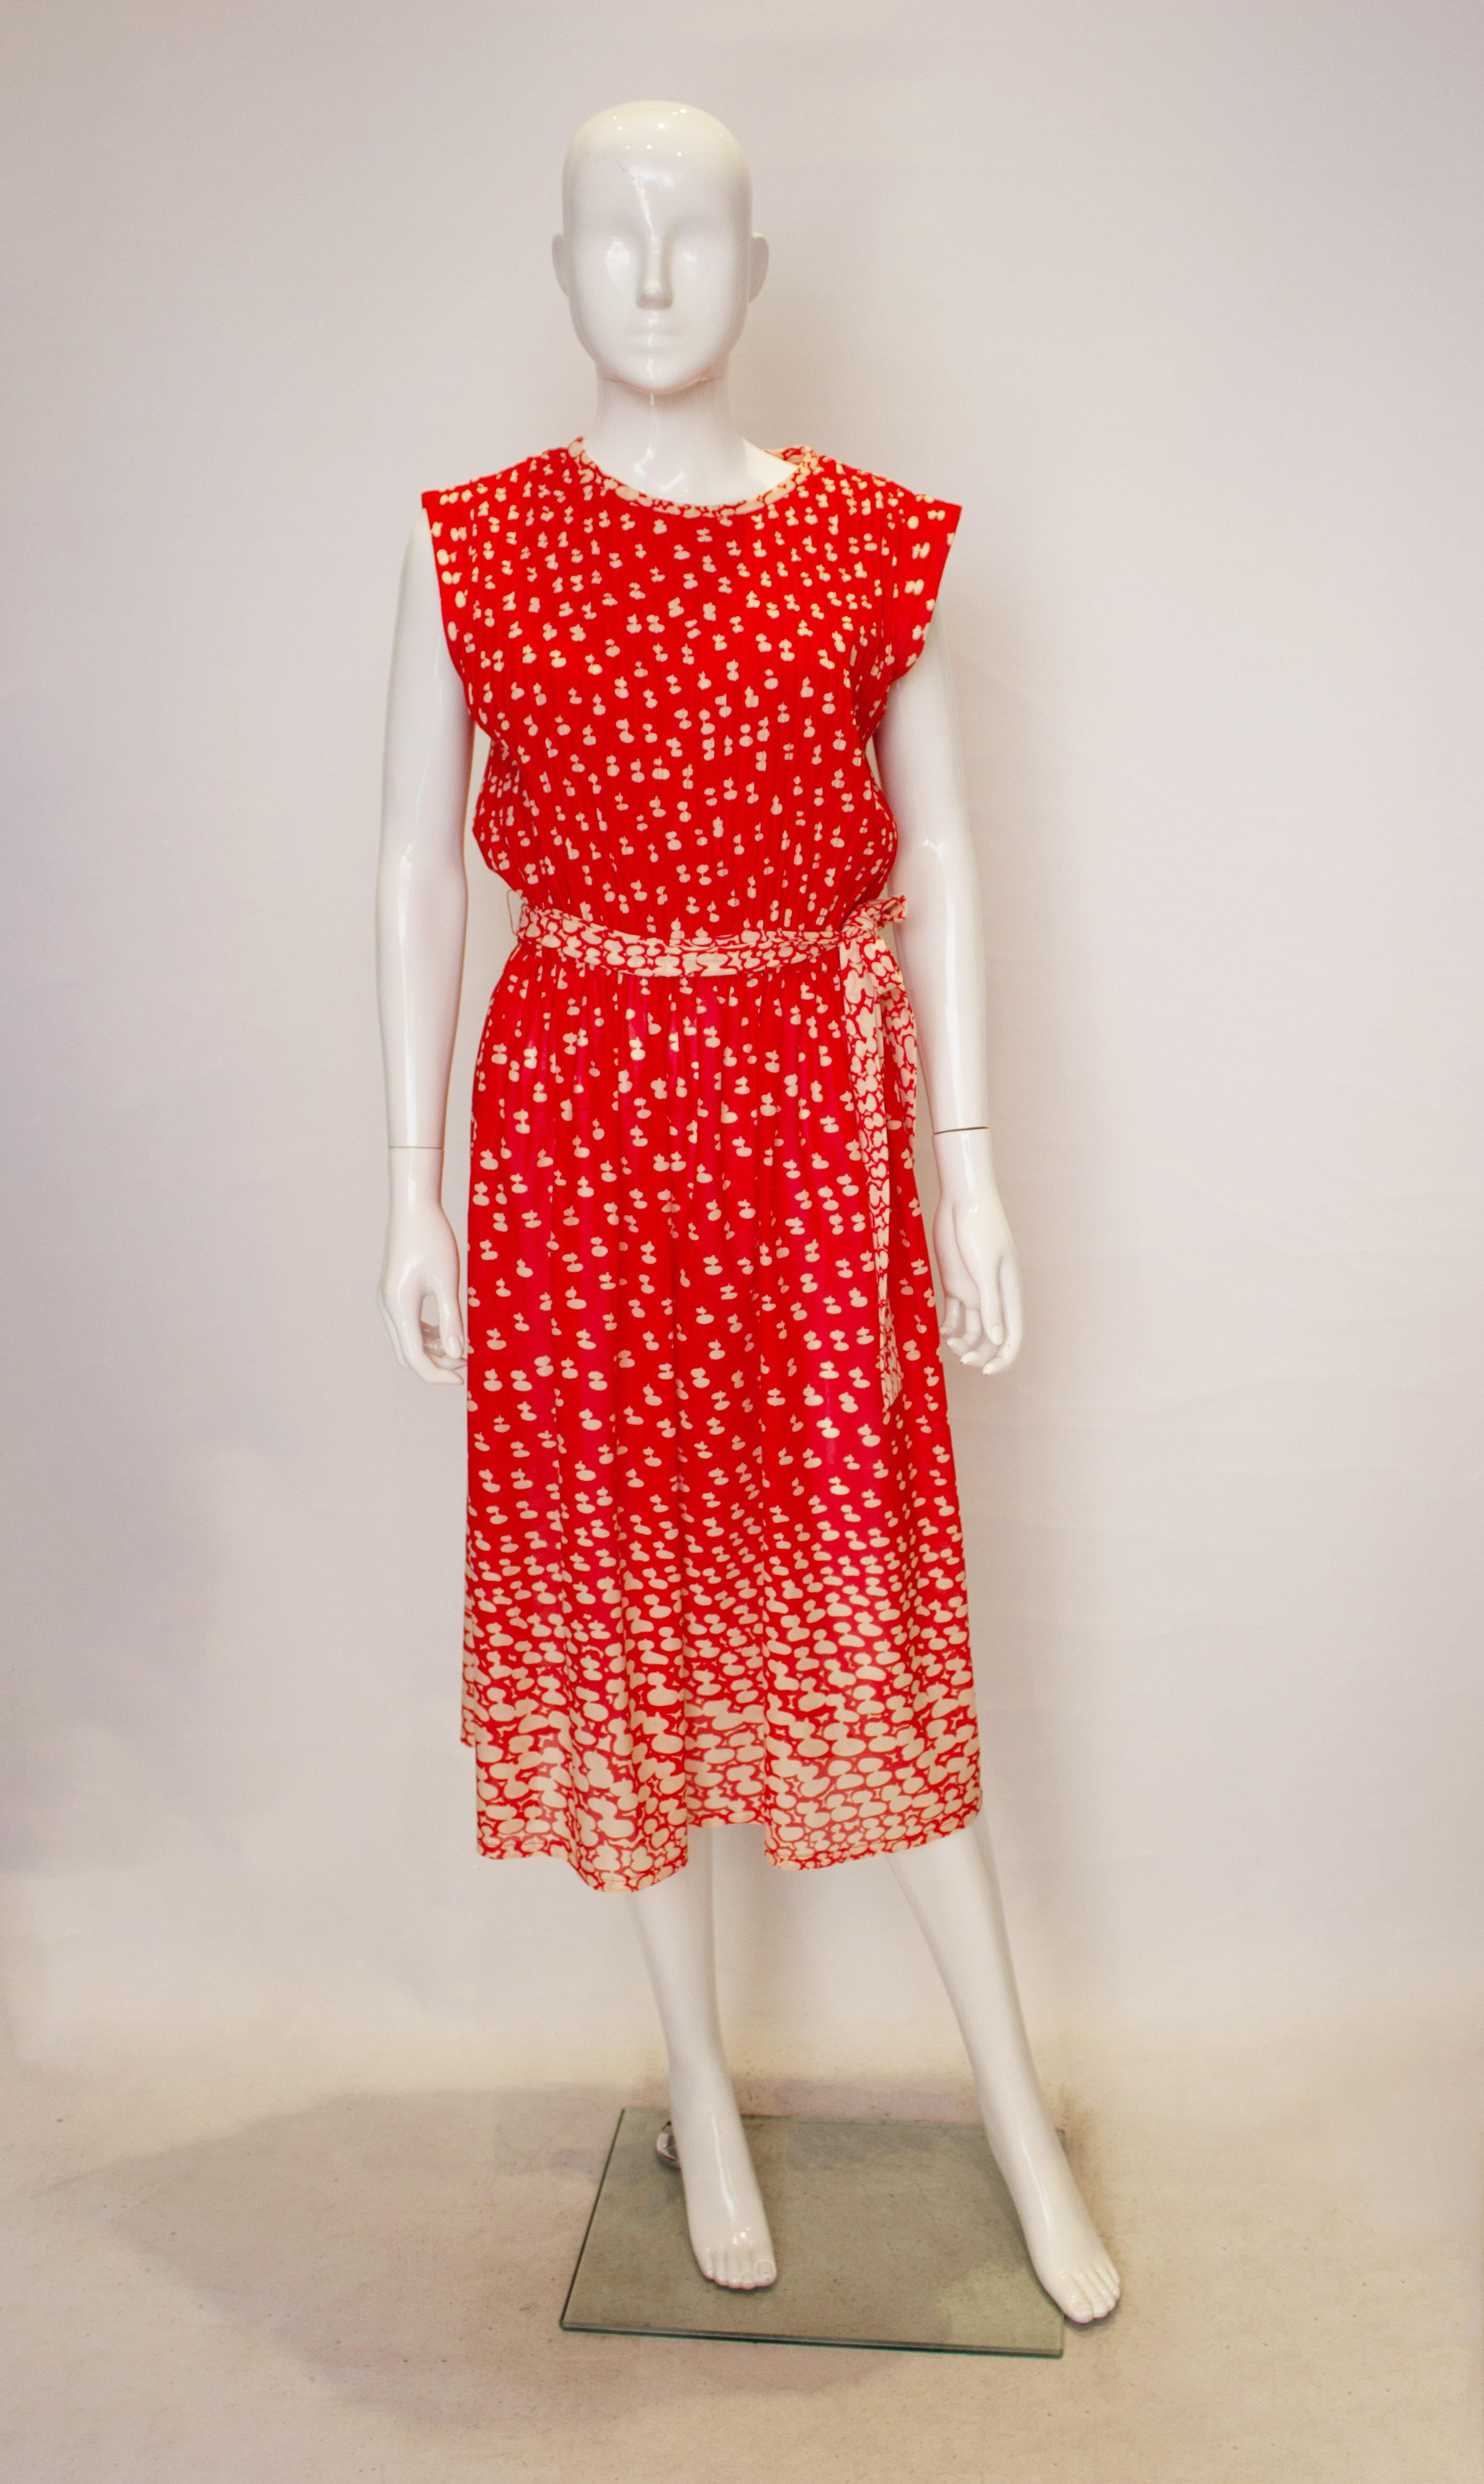 A chic vintage cocktail dress in wonderful combination of print and pleats. The dress has a keyhole opening at the back , pattern detail at the hem and a self fabric belt. The dress has an elasticated waist and will fit a waist 26'' - 29''